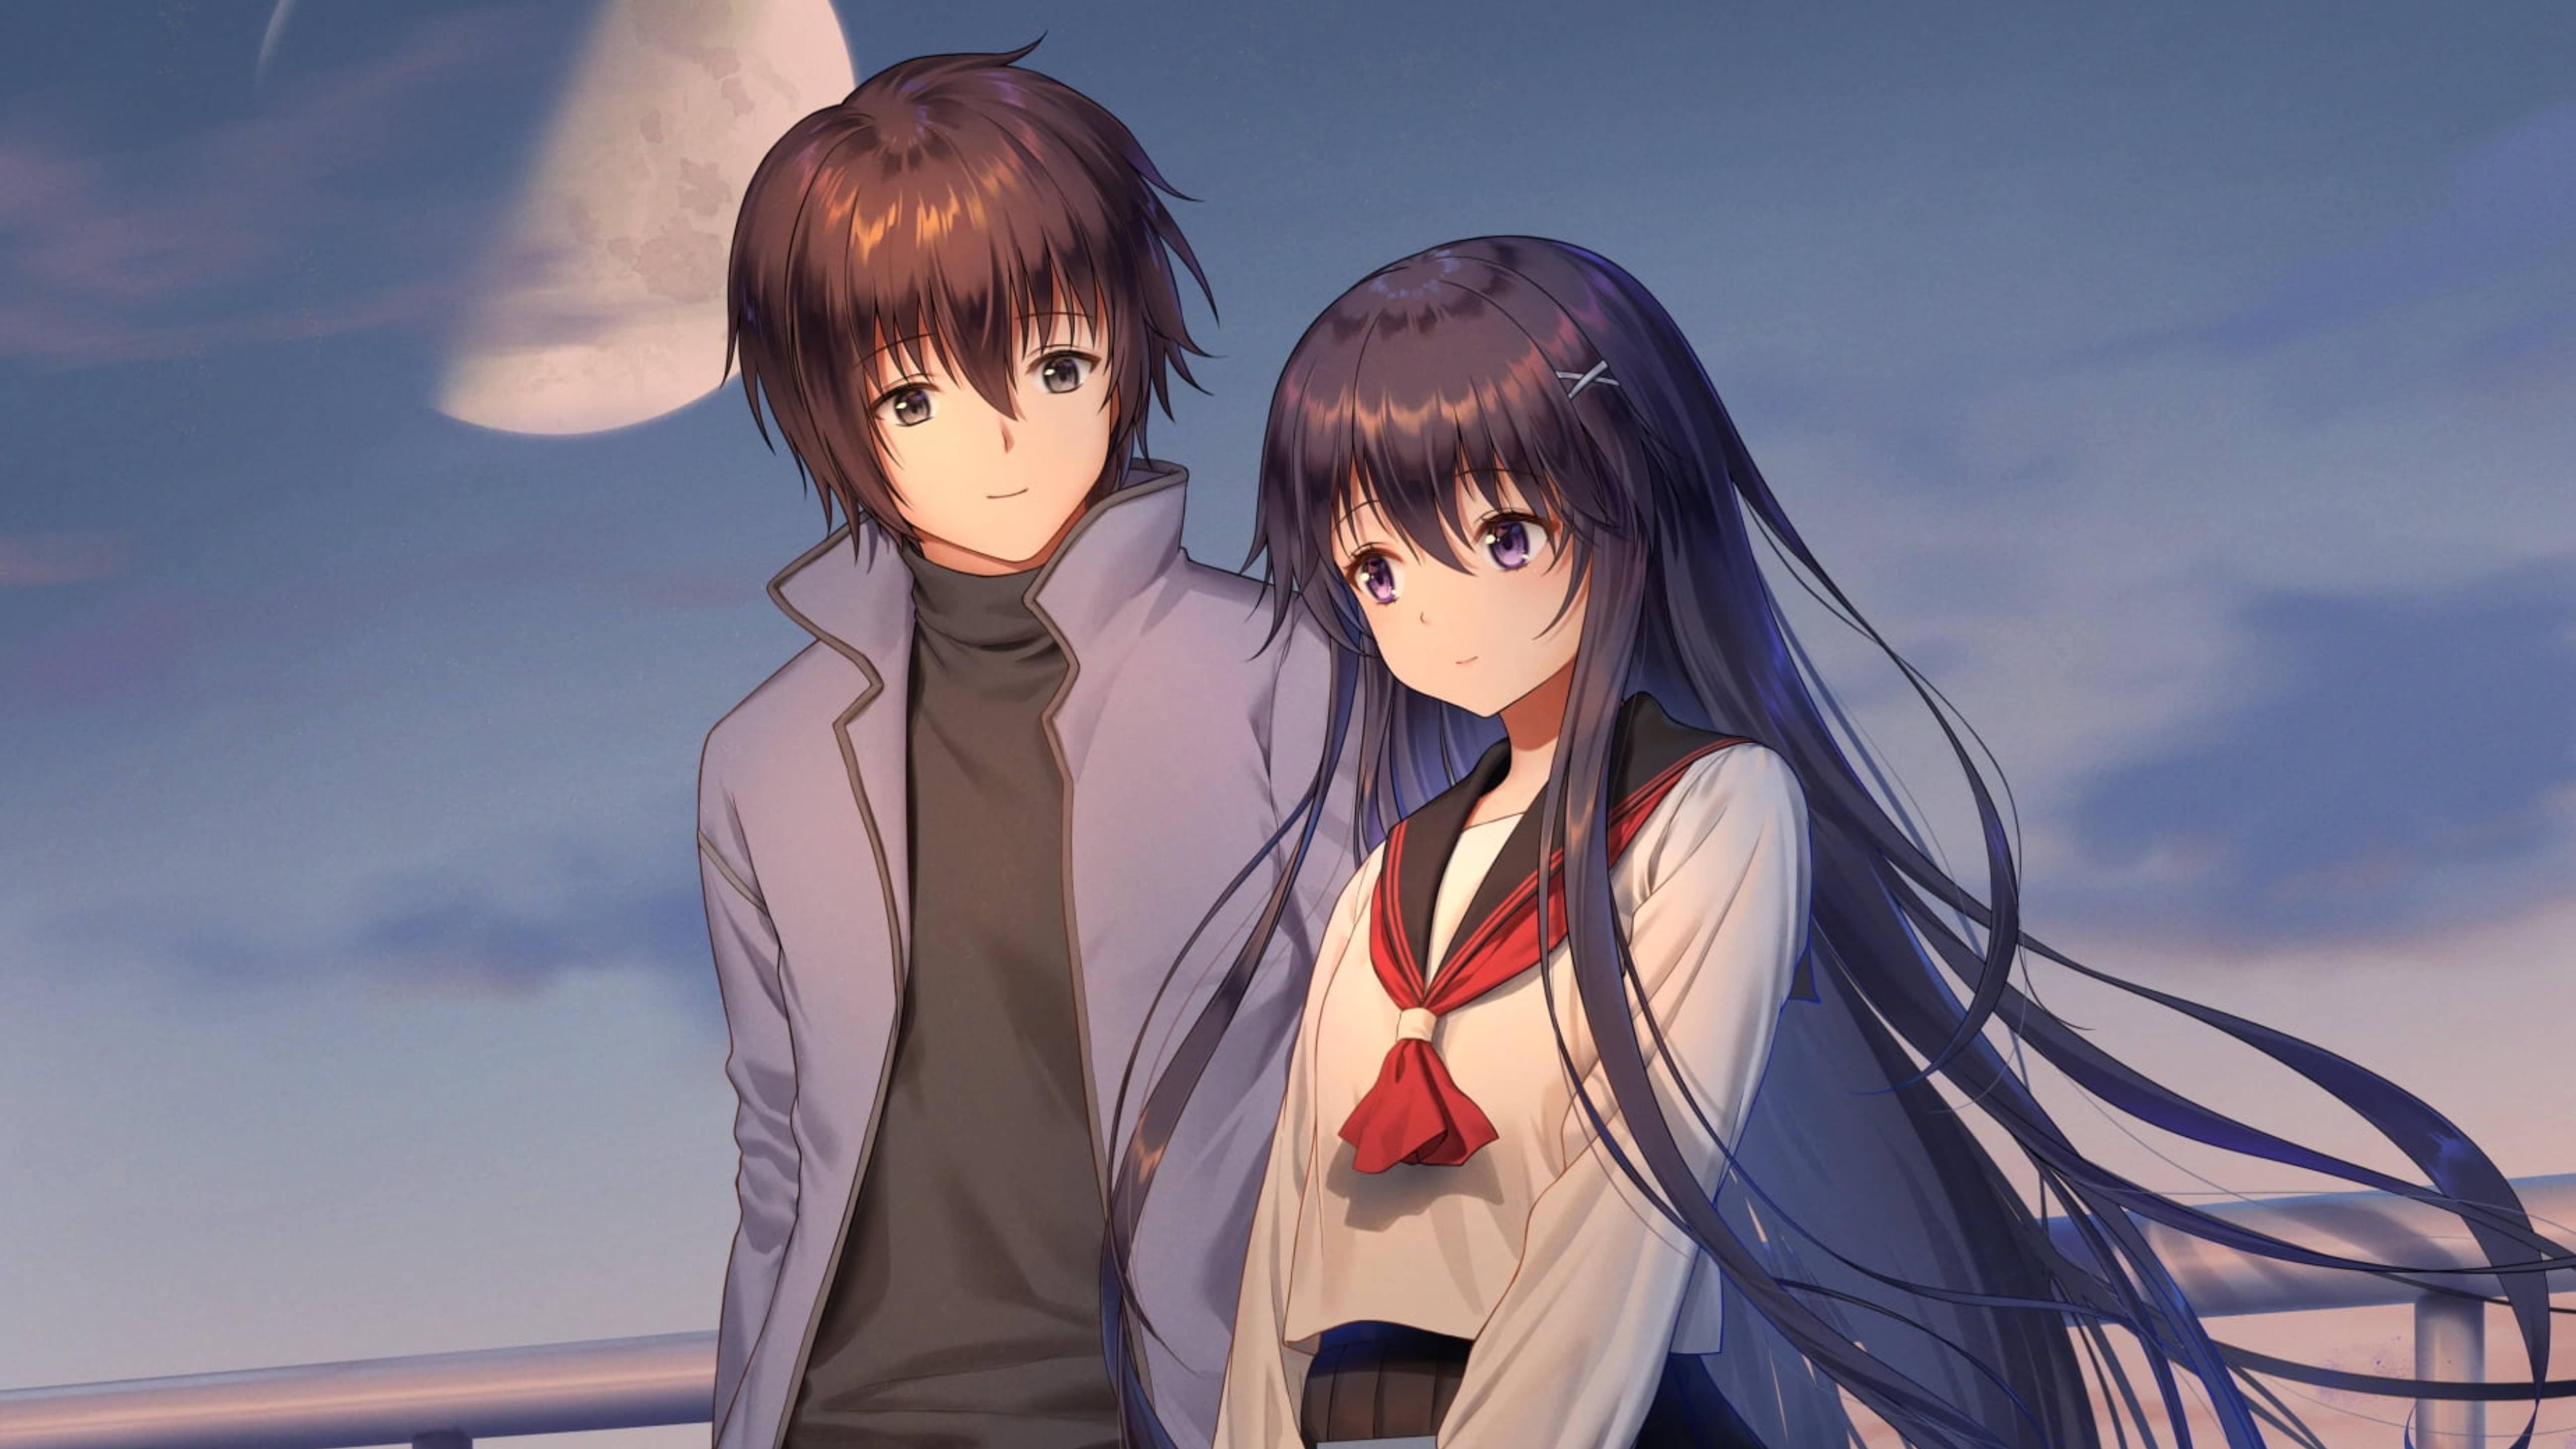 Download Cute Anime Couple Under Moon Wallpaper 